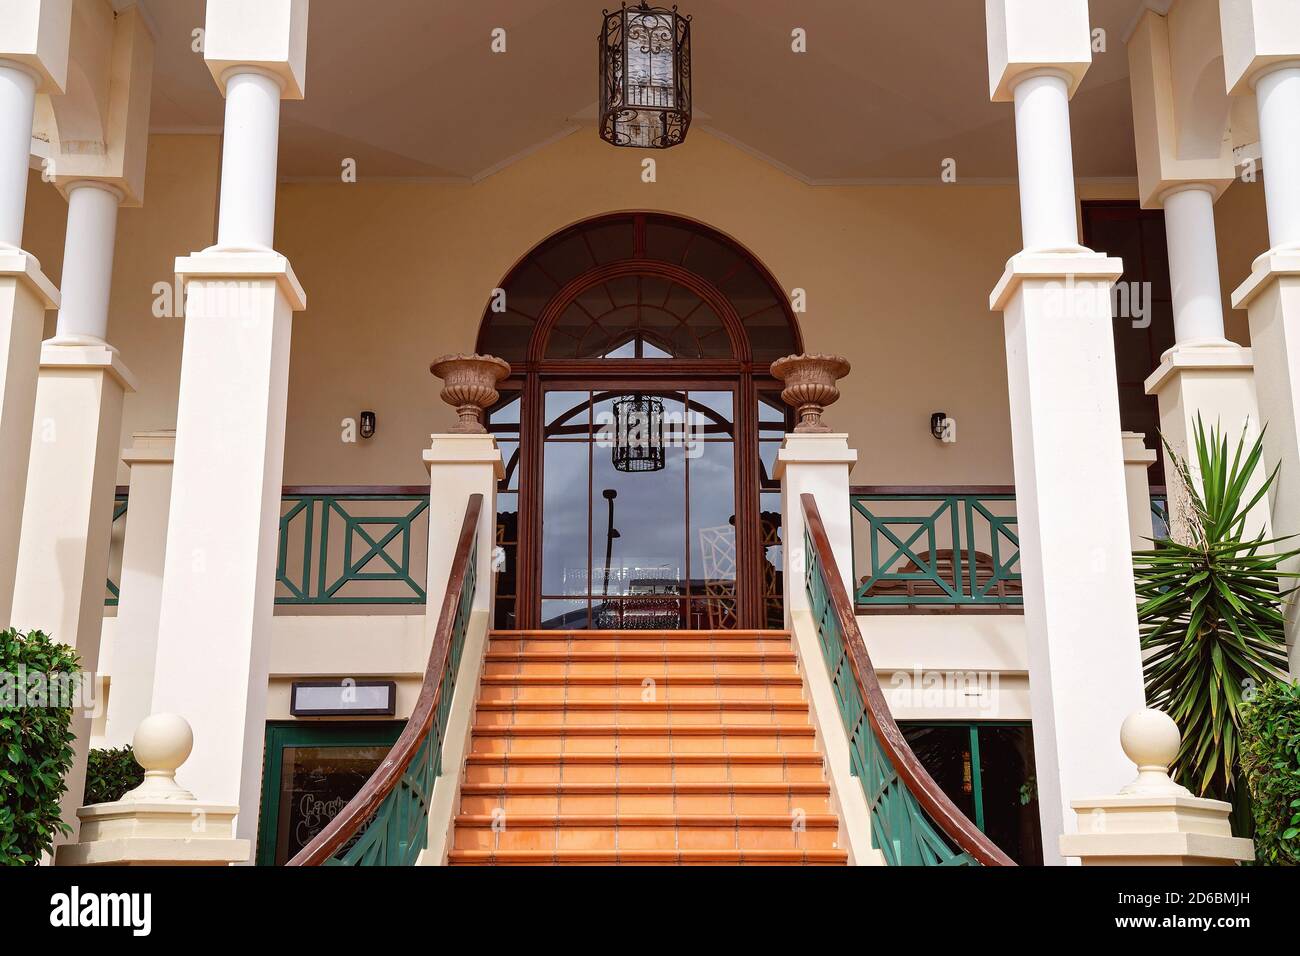 Townsville, Queensland, Australia - June 2020: Staircase leading up to a majestic old building housing a restaurant Stock Photo